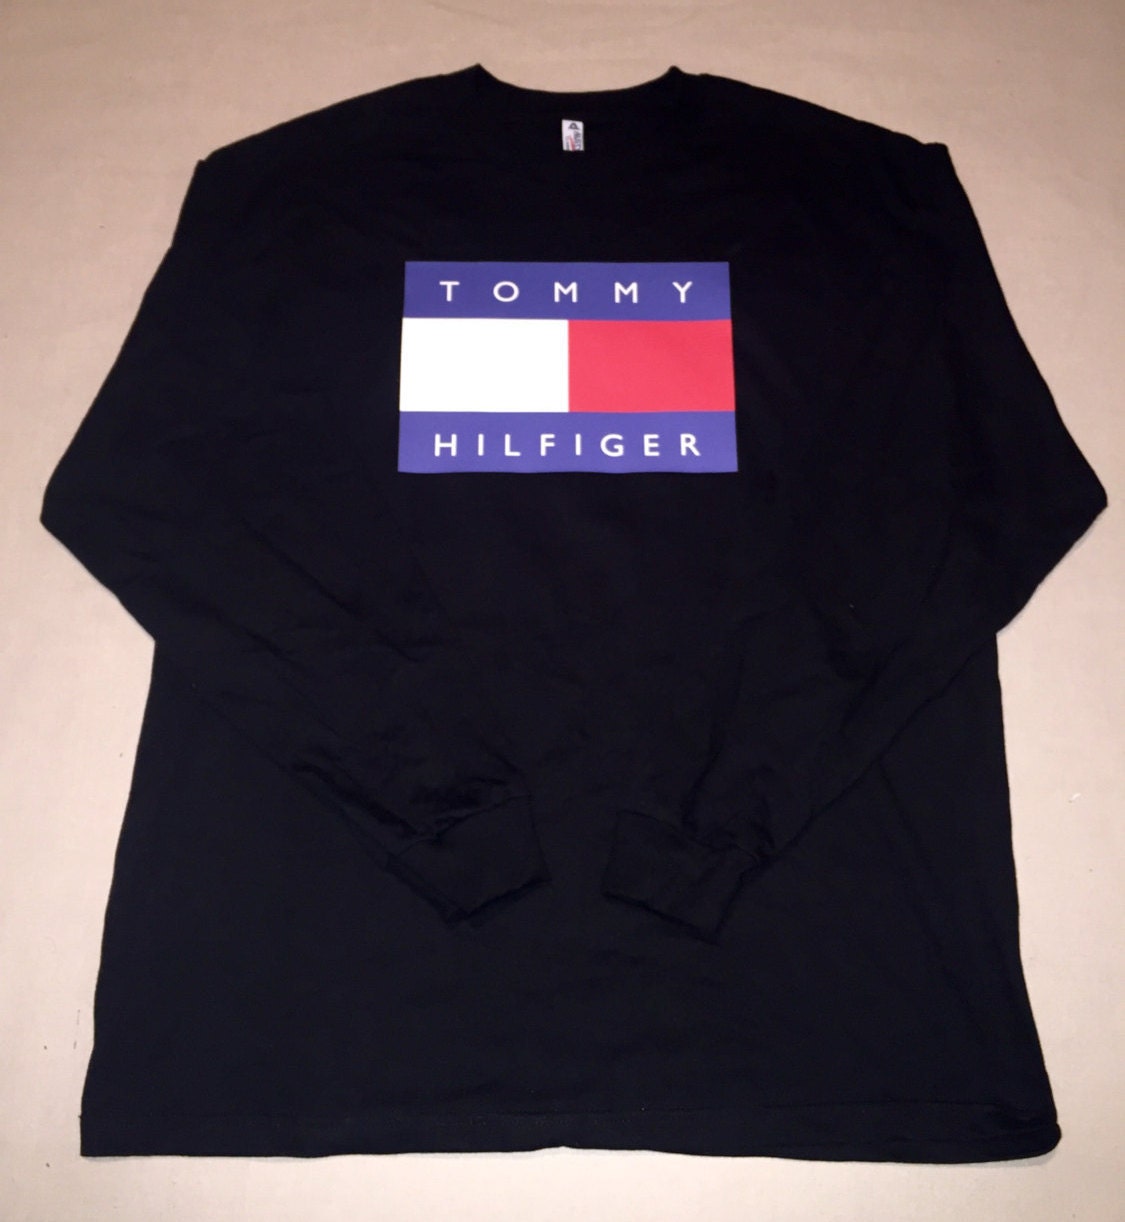 Tommy Hilfiger Logo T Shirt Long Sleeve Men's Size by COOL2THEIDEA